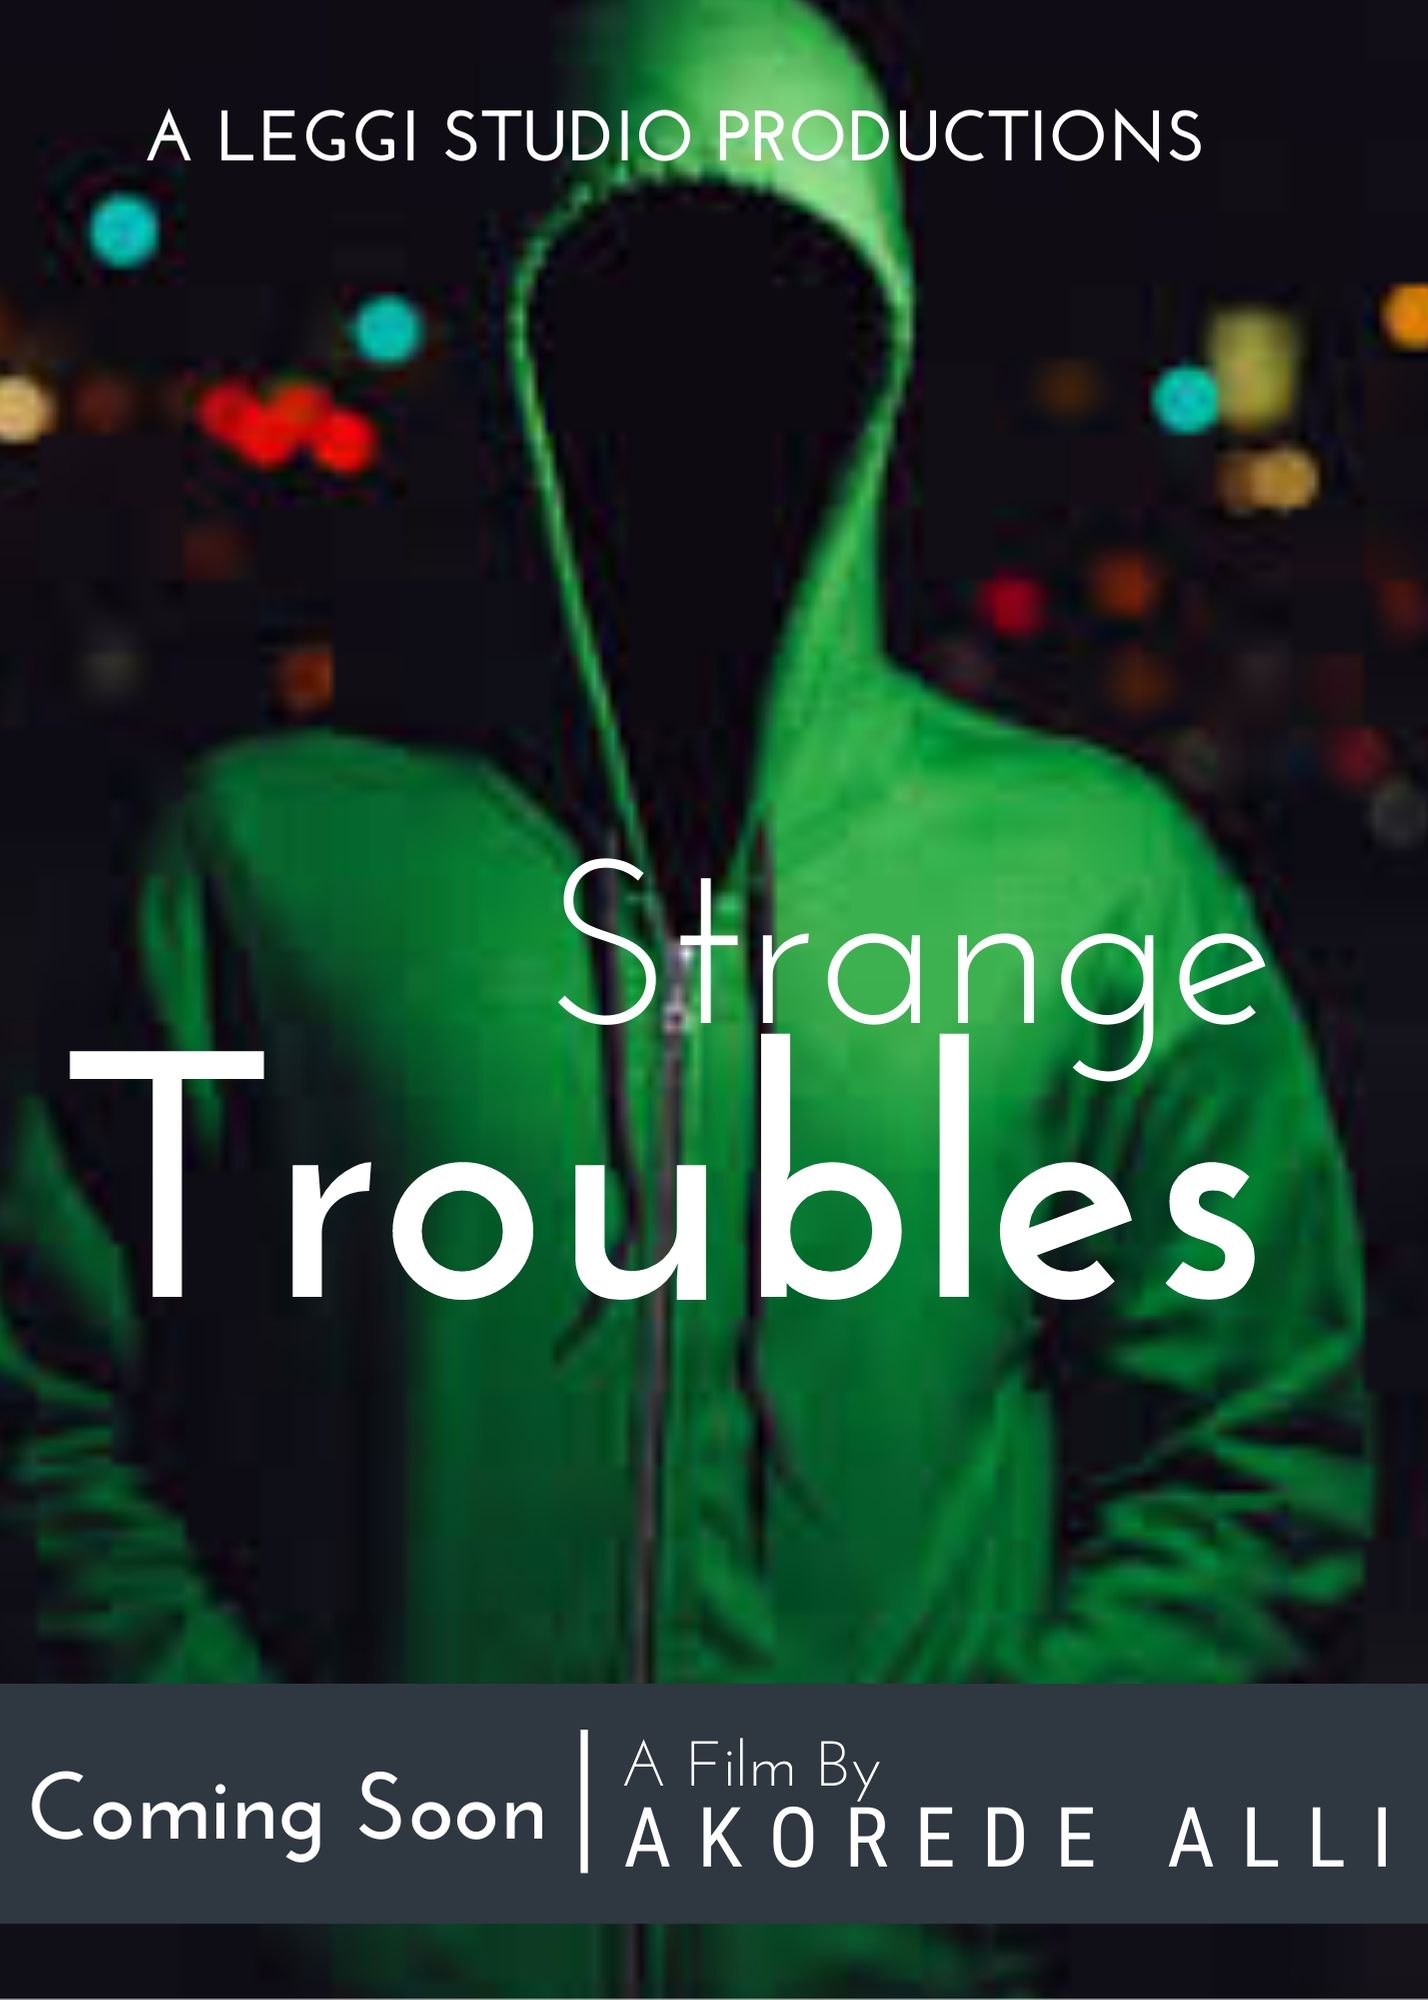 Strange Troubles: Ghost of Ebube (2021)